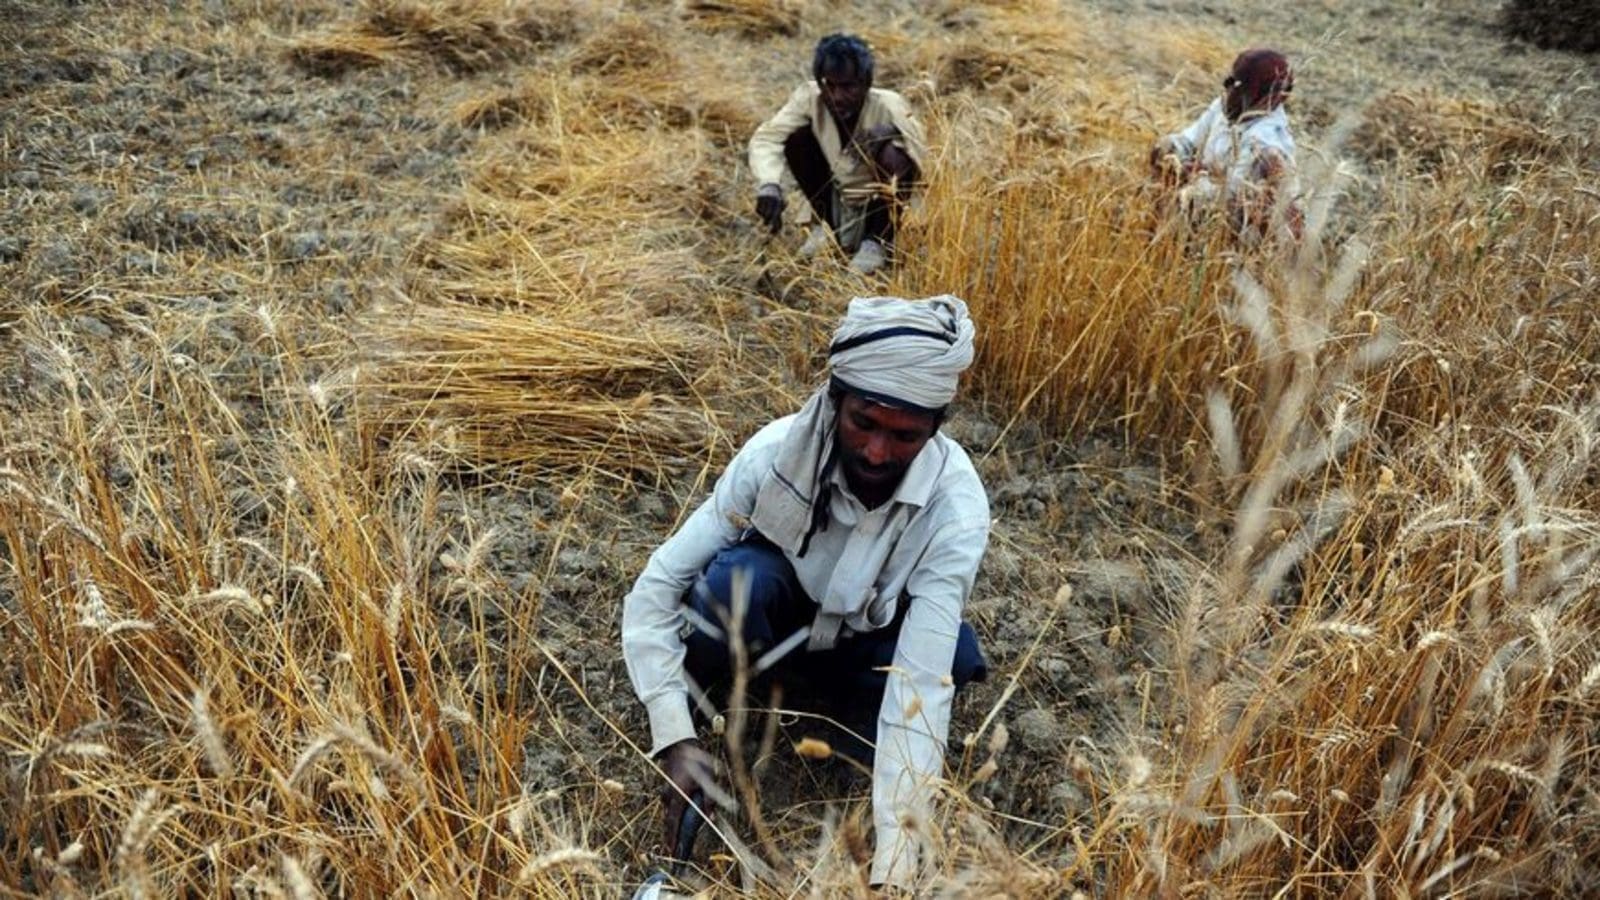 India’s sudden ban on wheat exports likely to hurt farmers